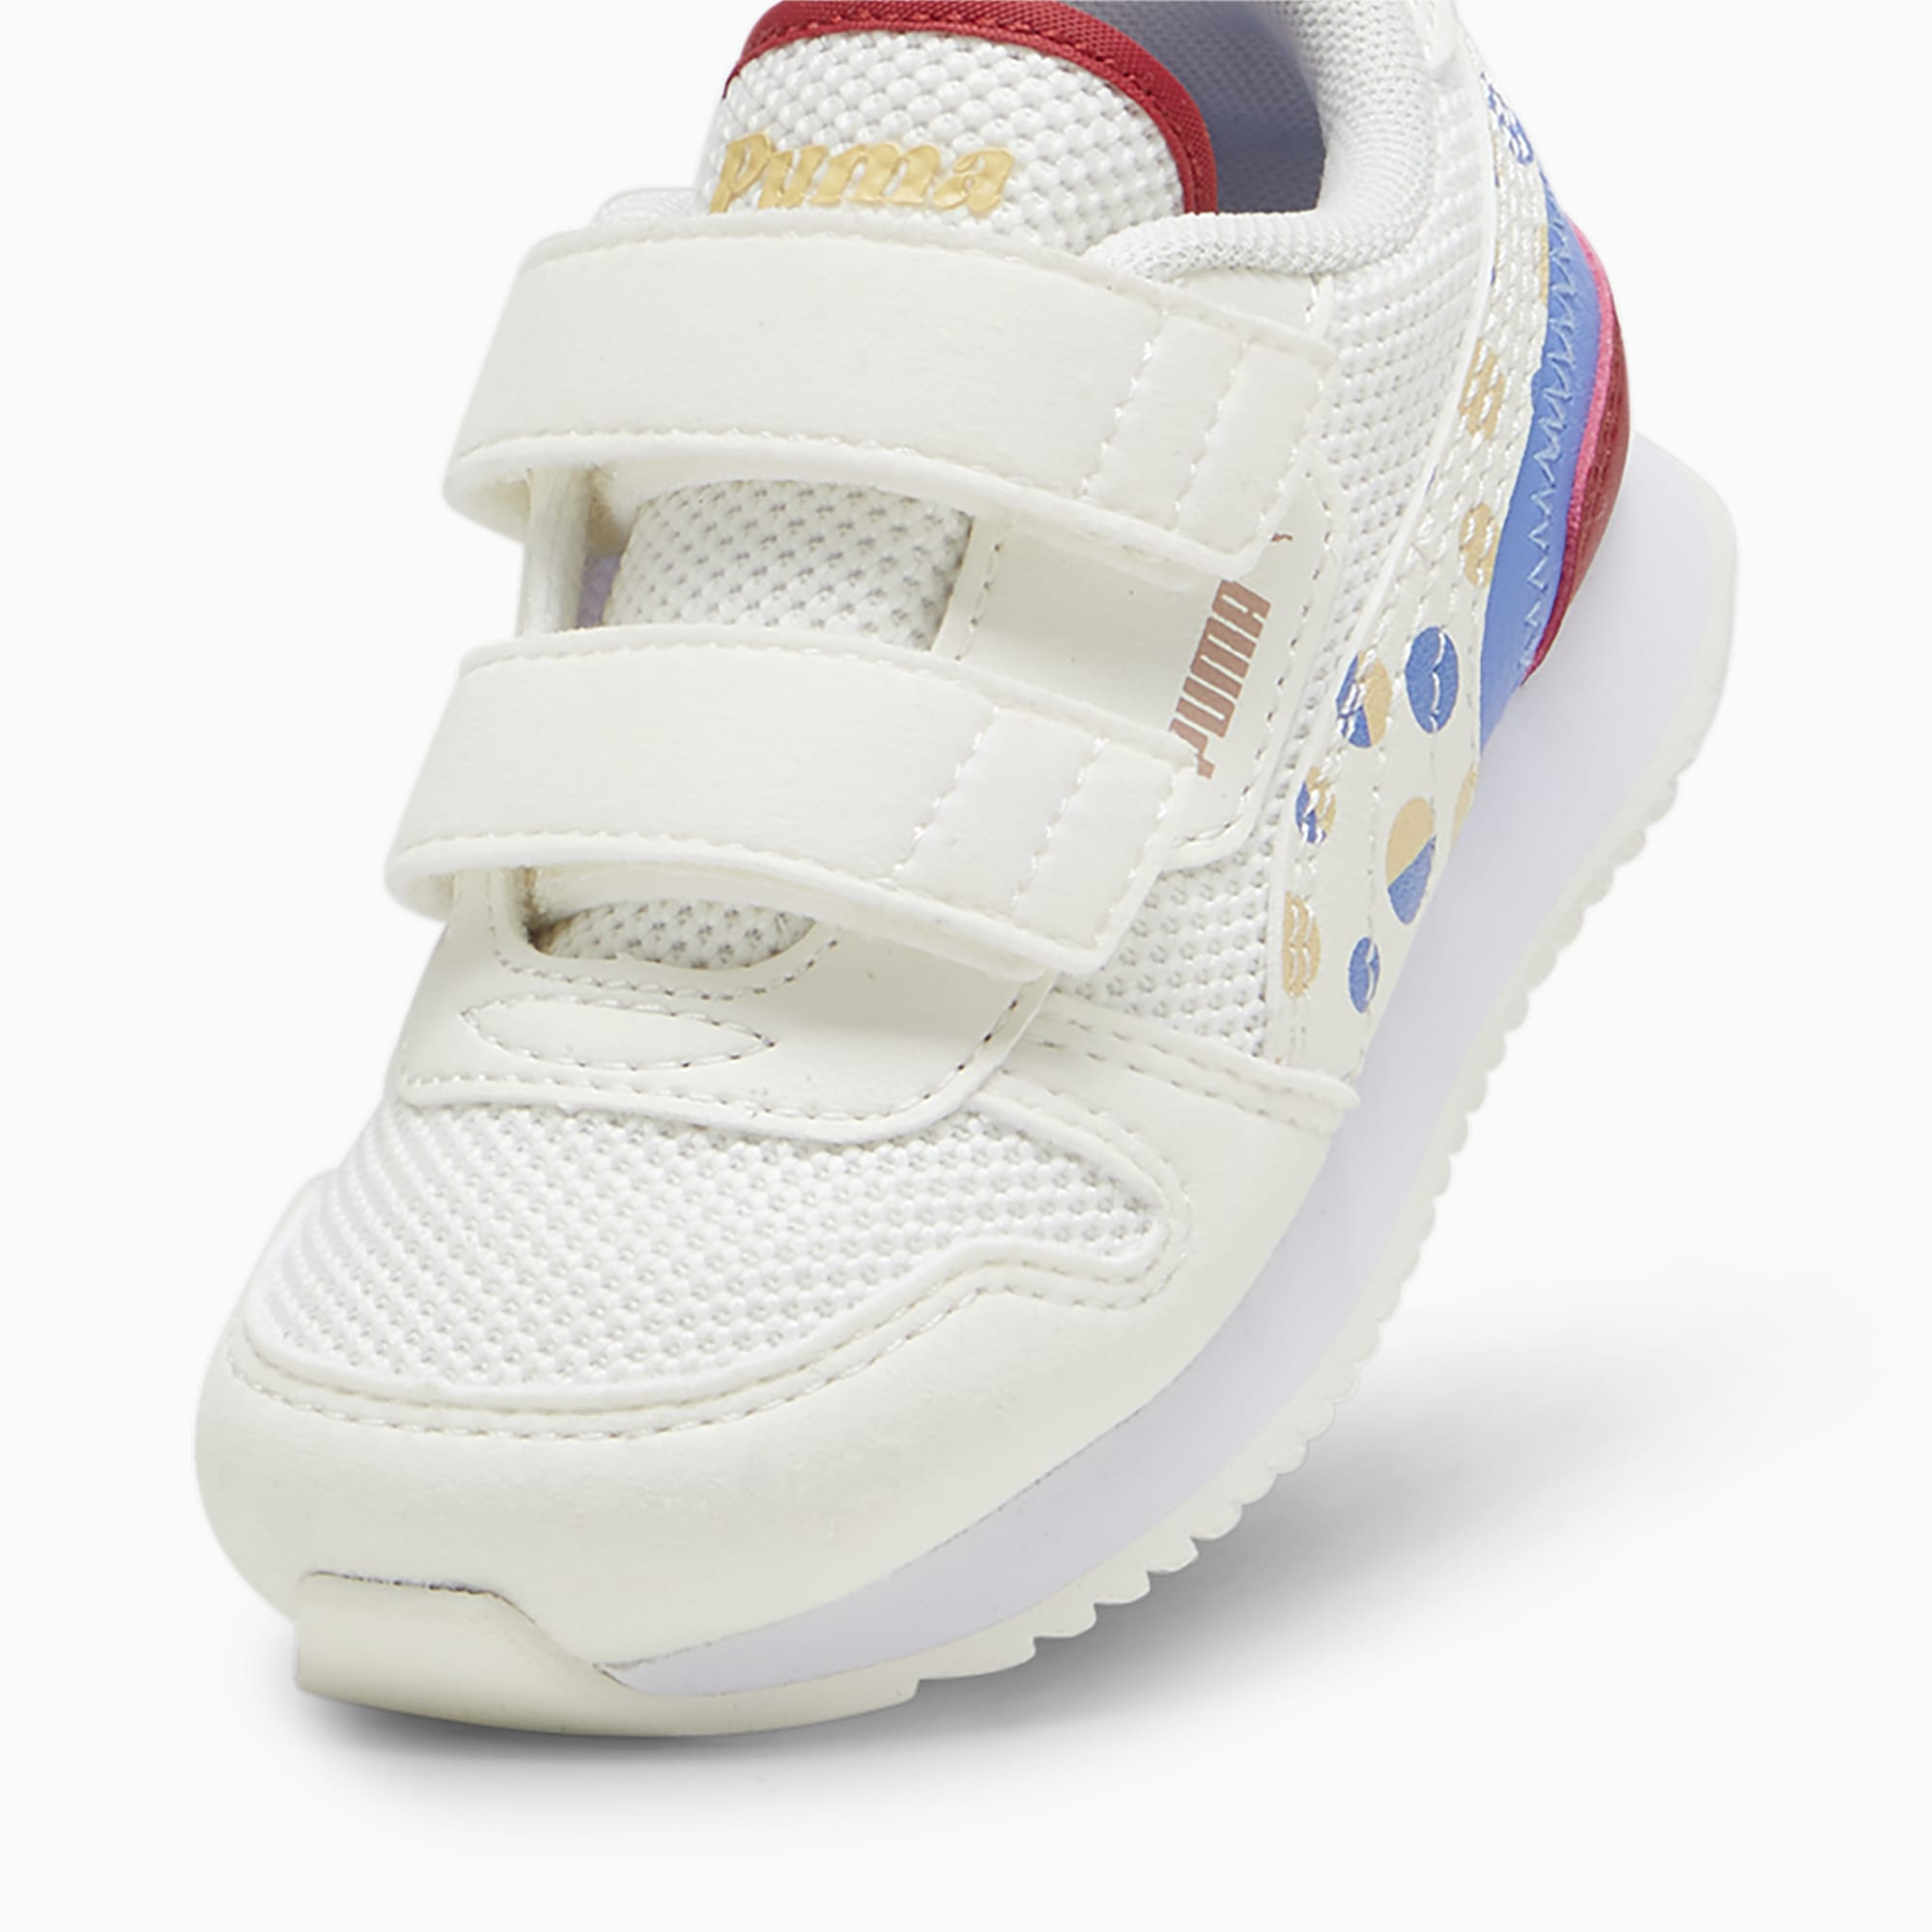 PUMA R78 Summer Camp Toddlers' Sneakers, Warm White/Blue Skies/Chamomile, Size 19, Shoes